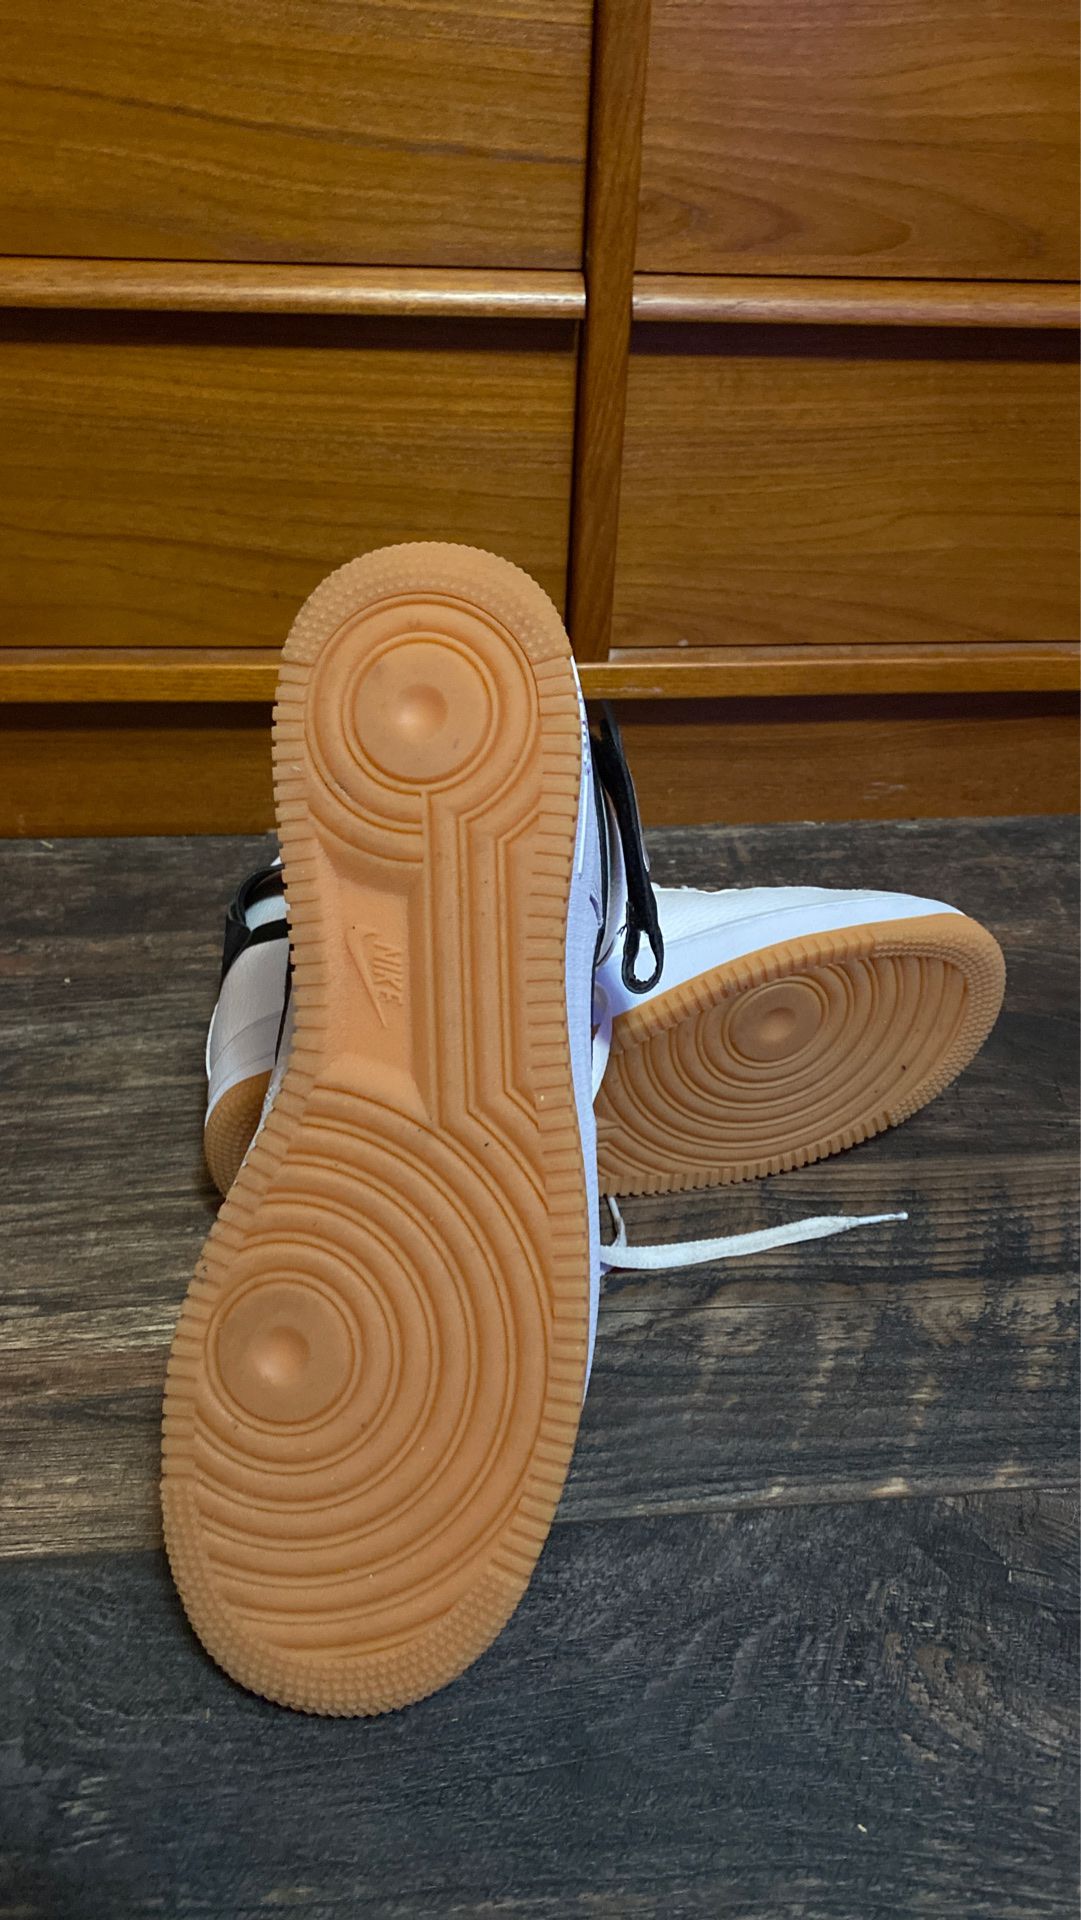 nike air force 1 mid 07 LV8 mens gum dark for Sale in Des Plaines, IL -  OfferUp